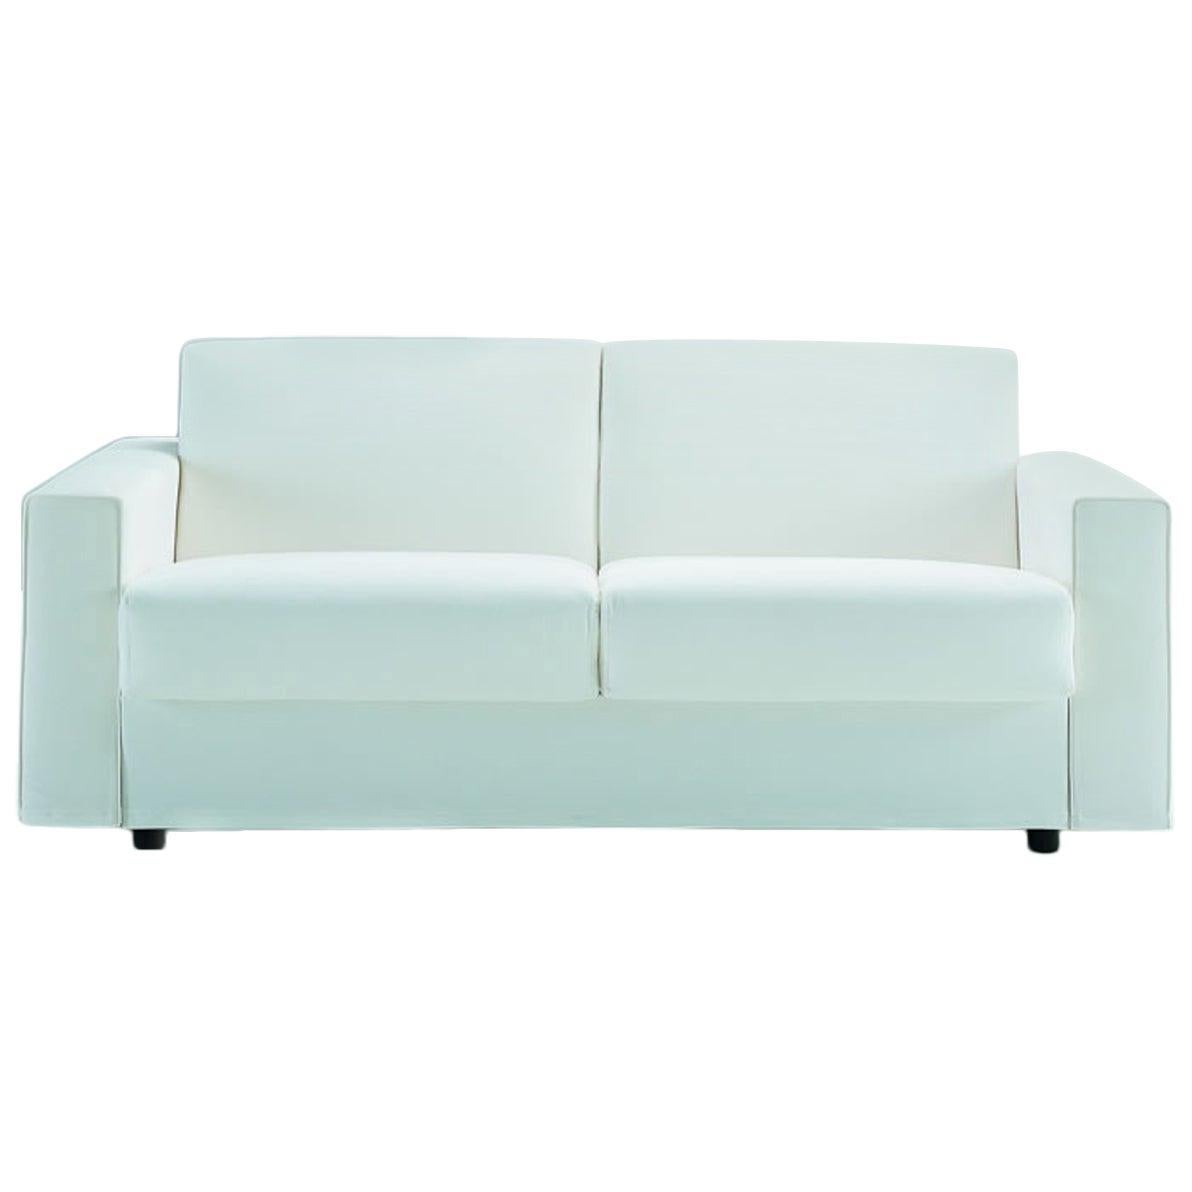 Contemporary Italian Sofa Bed with Storage, Made in Italy, New For Sale